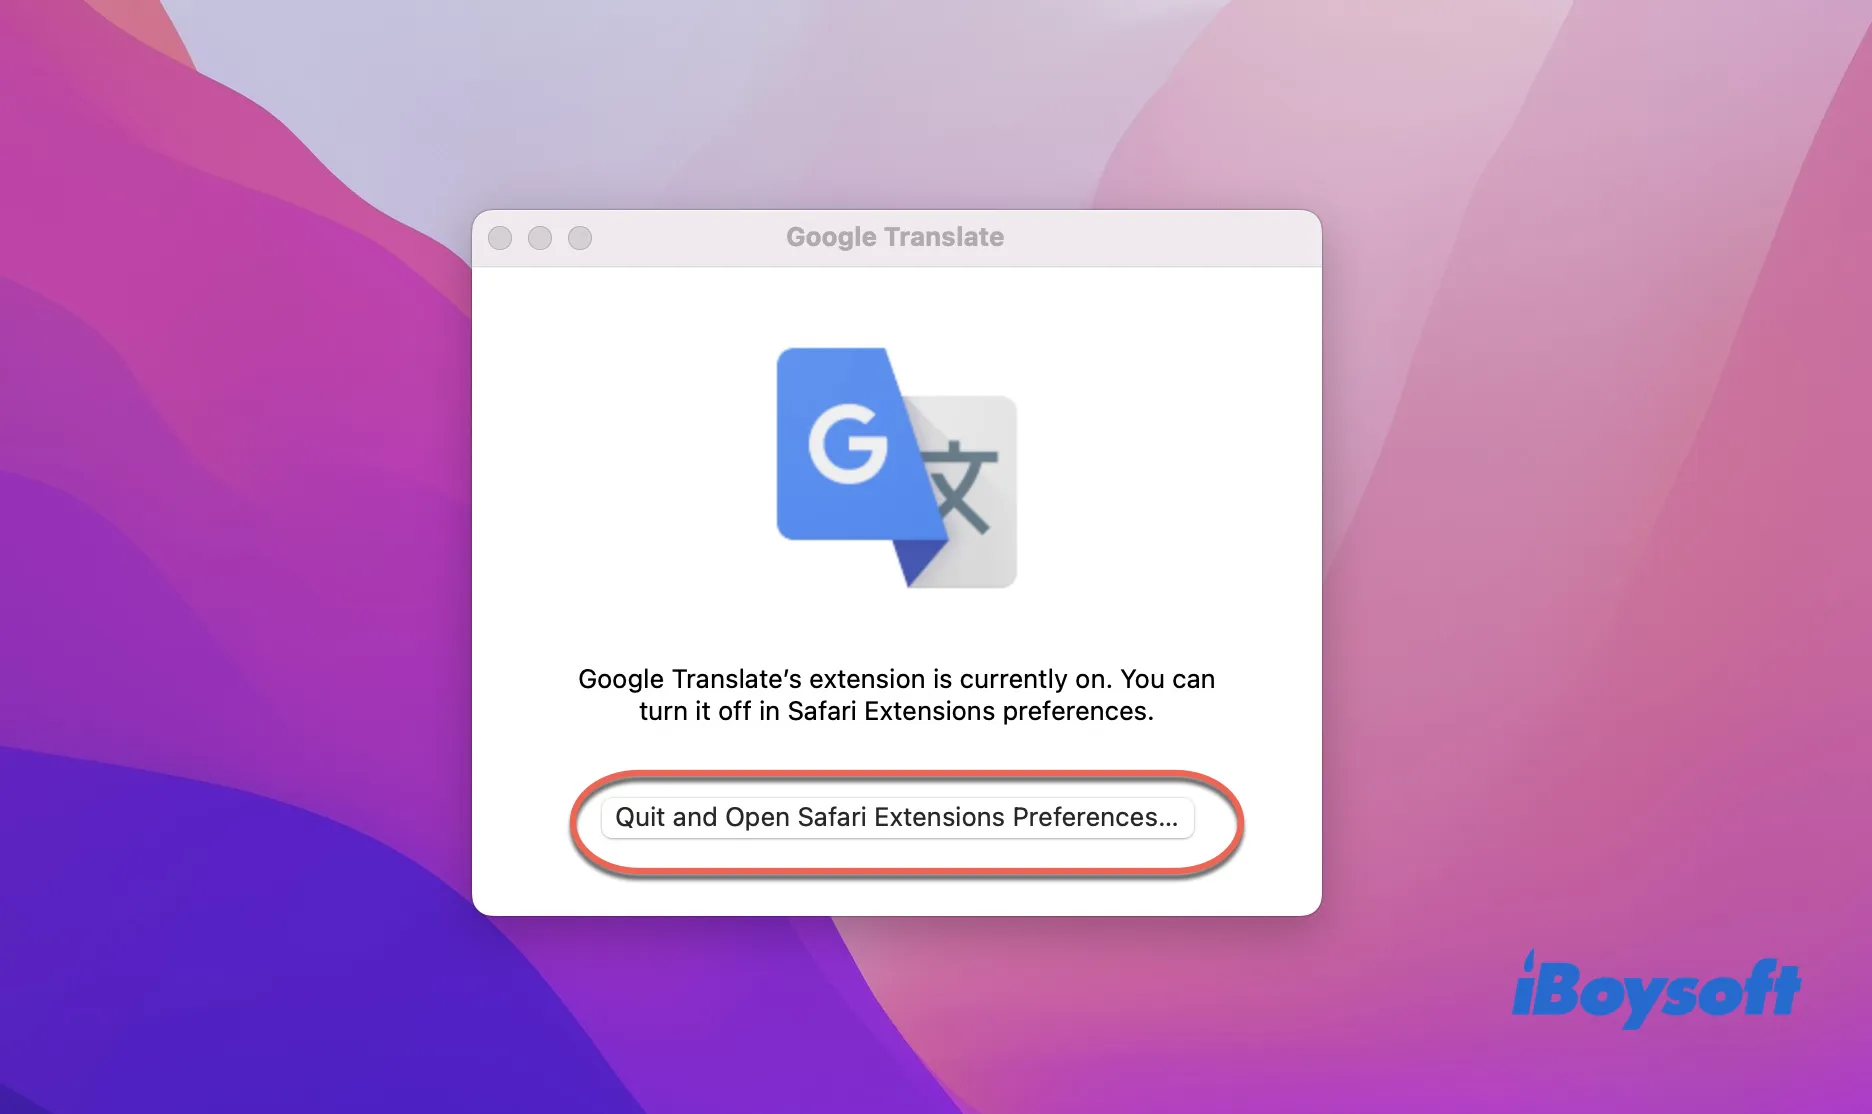 Quit and Open Safari Extensions Preferences